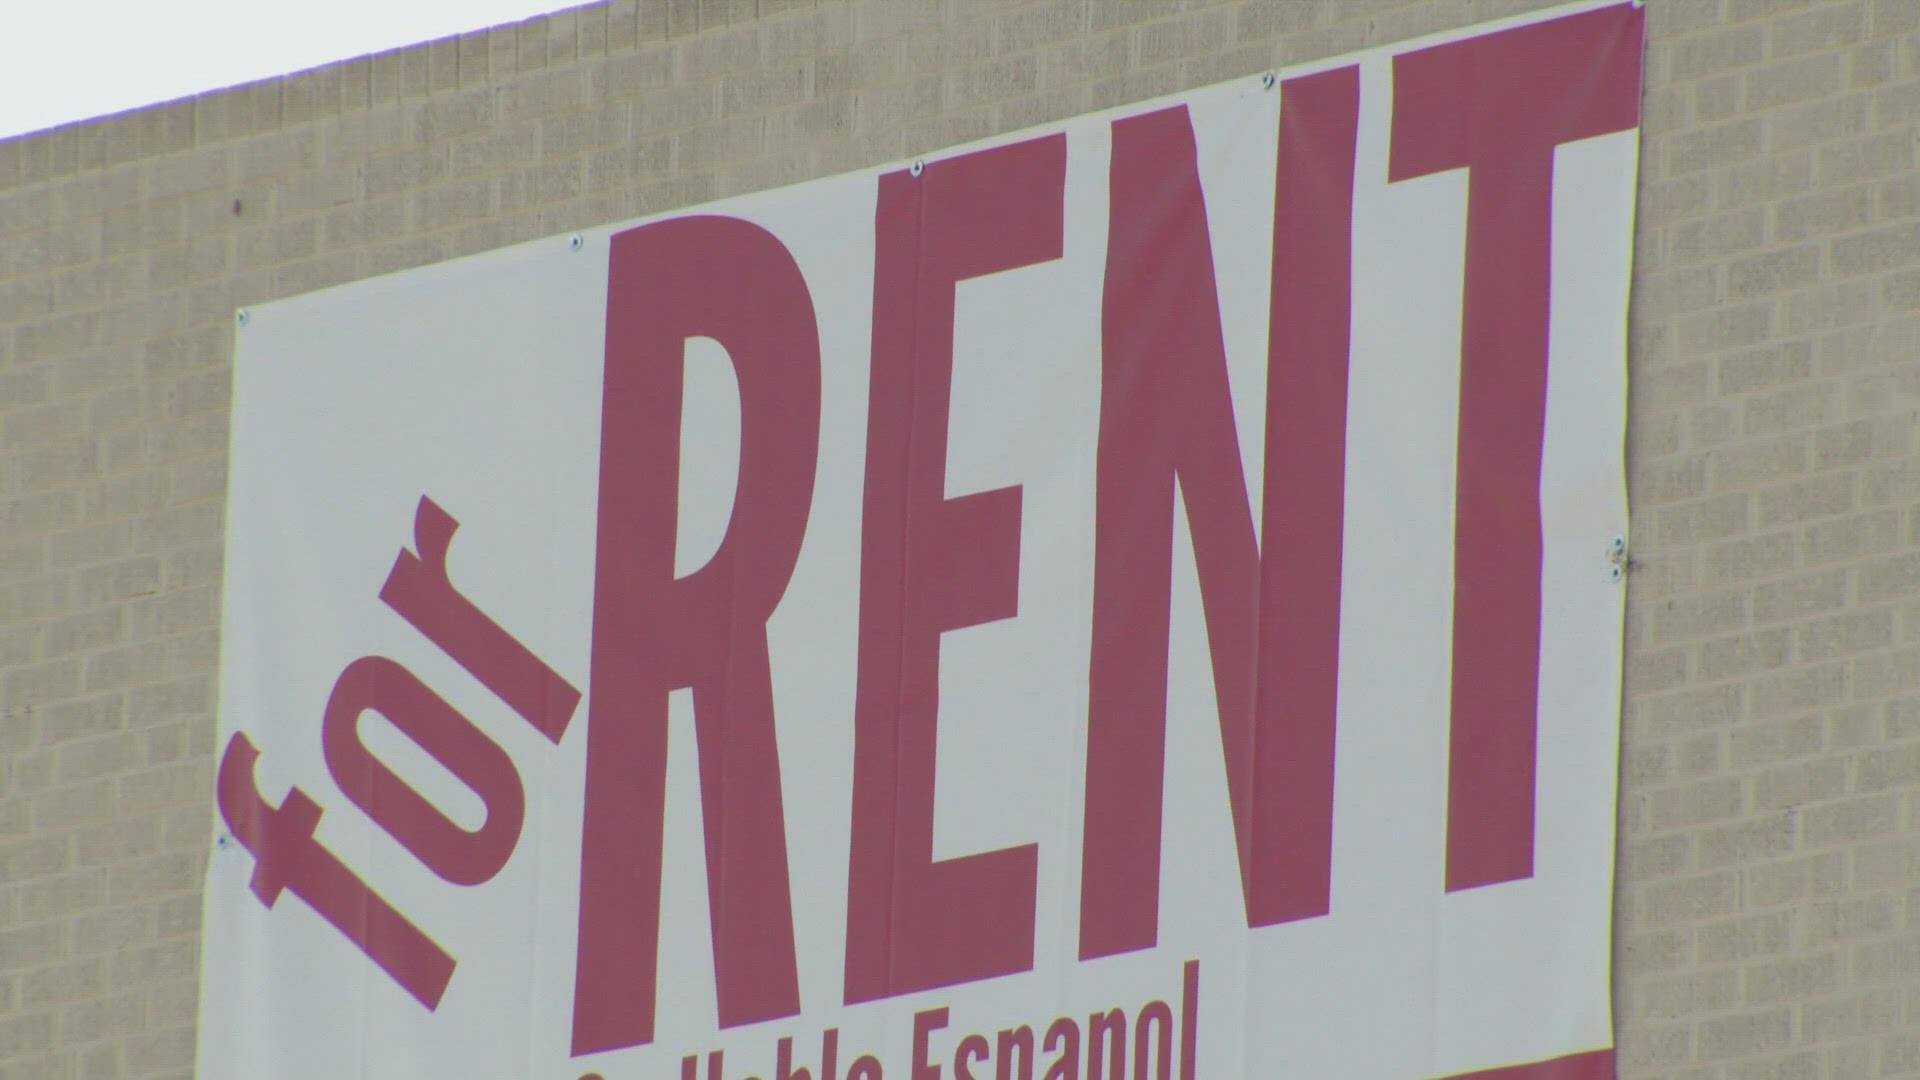 The number of people renting in Knoxville dropped by 2% compared to this time last year.